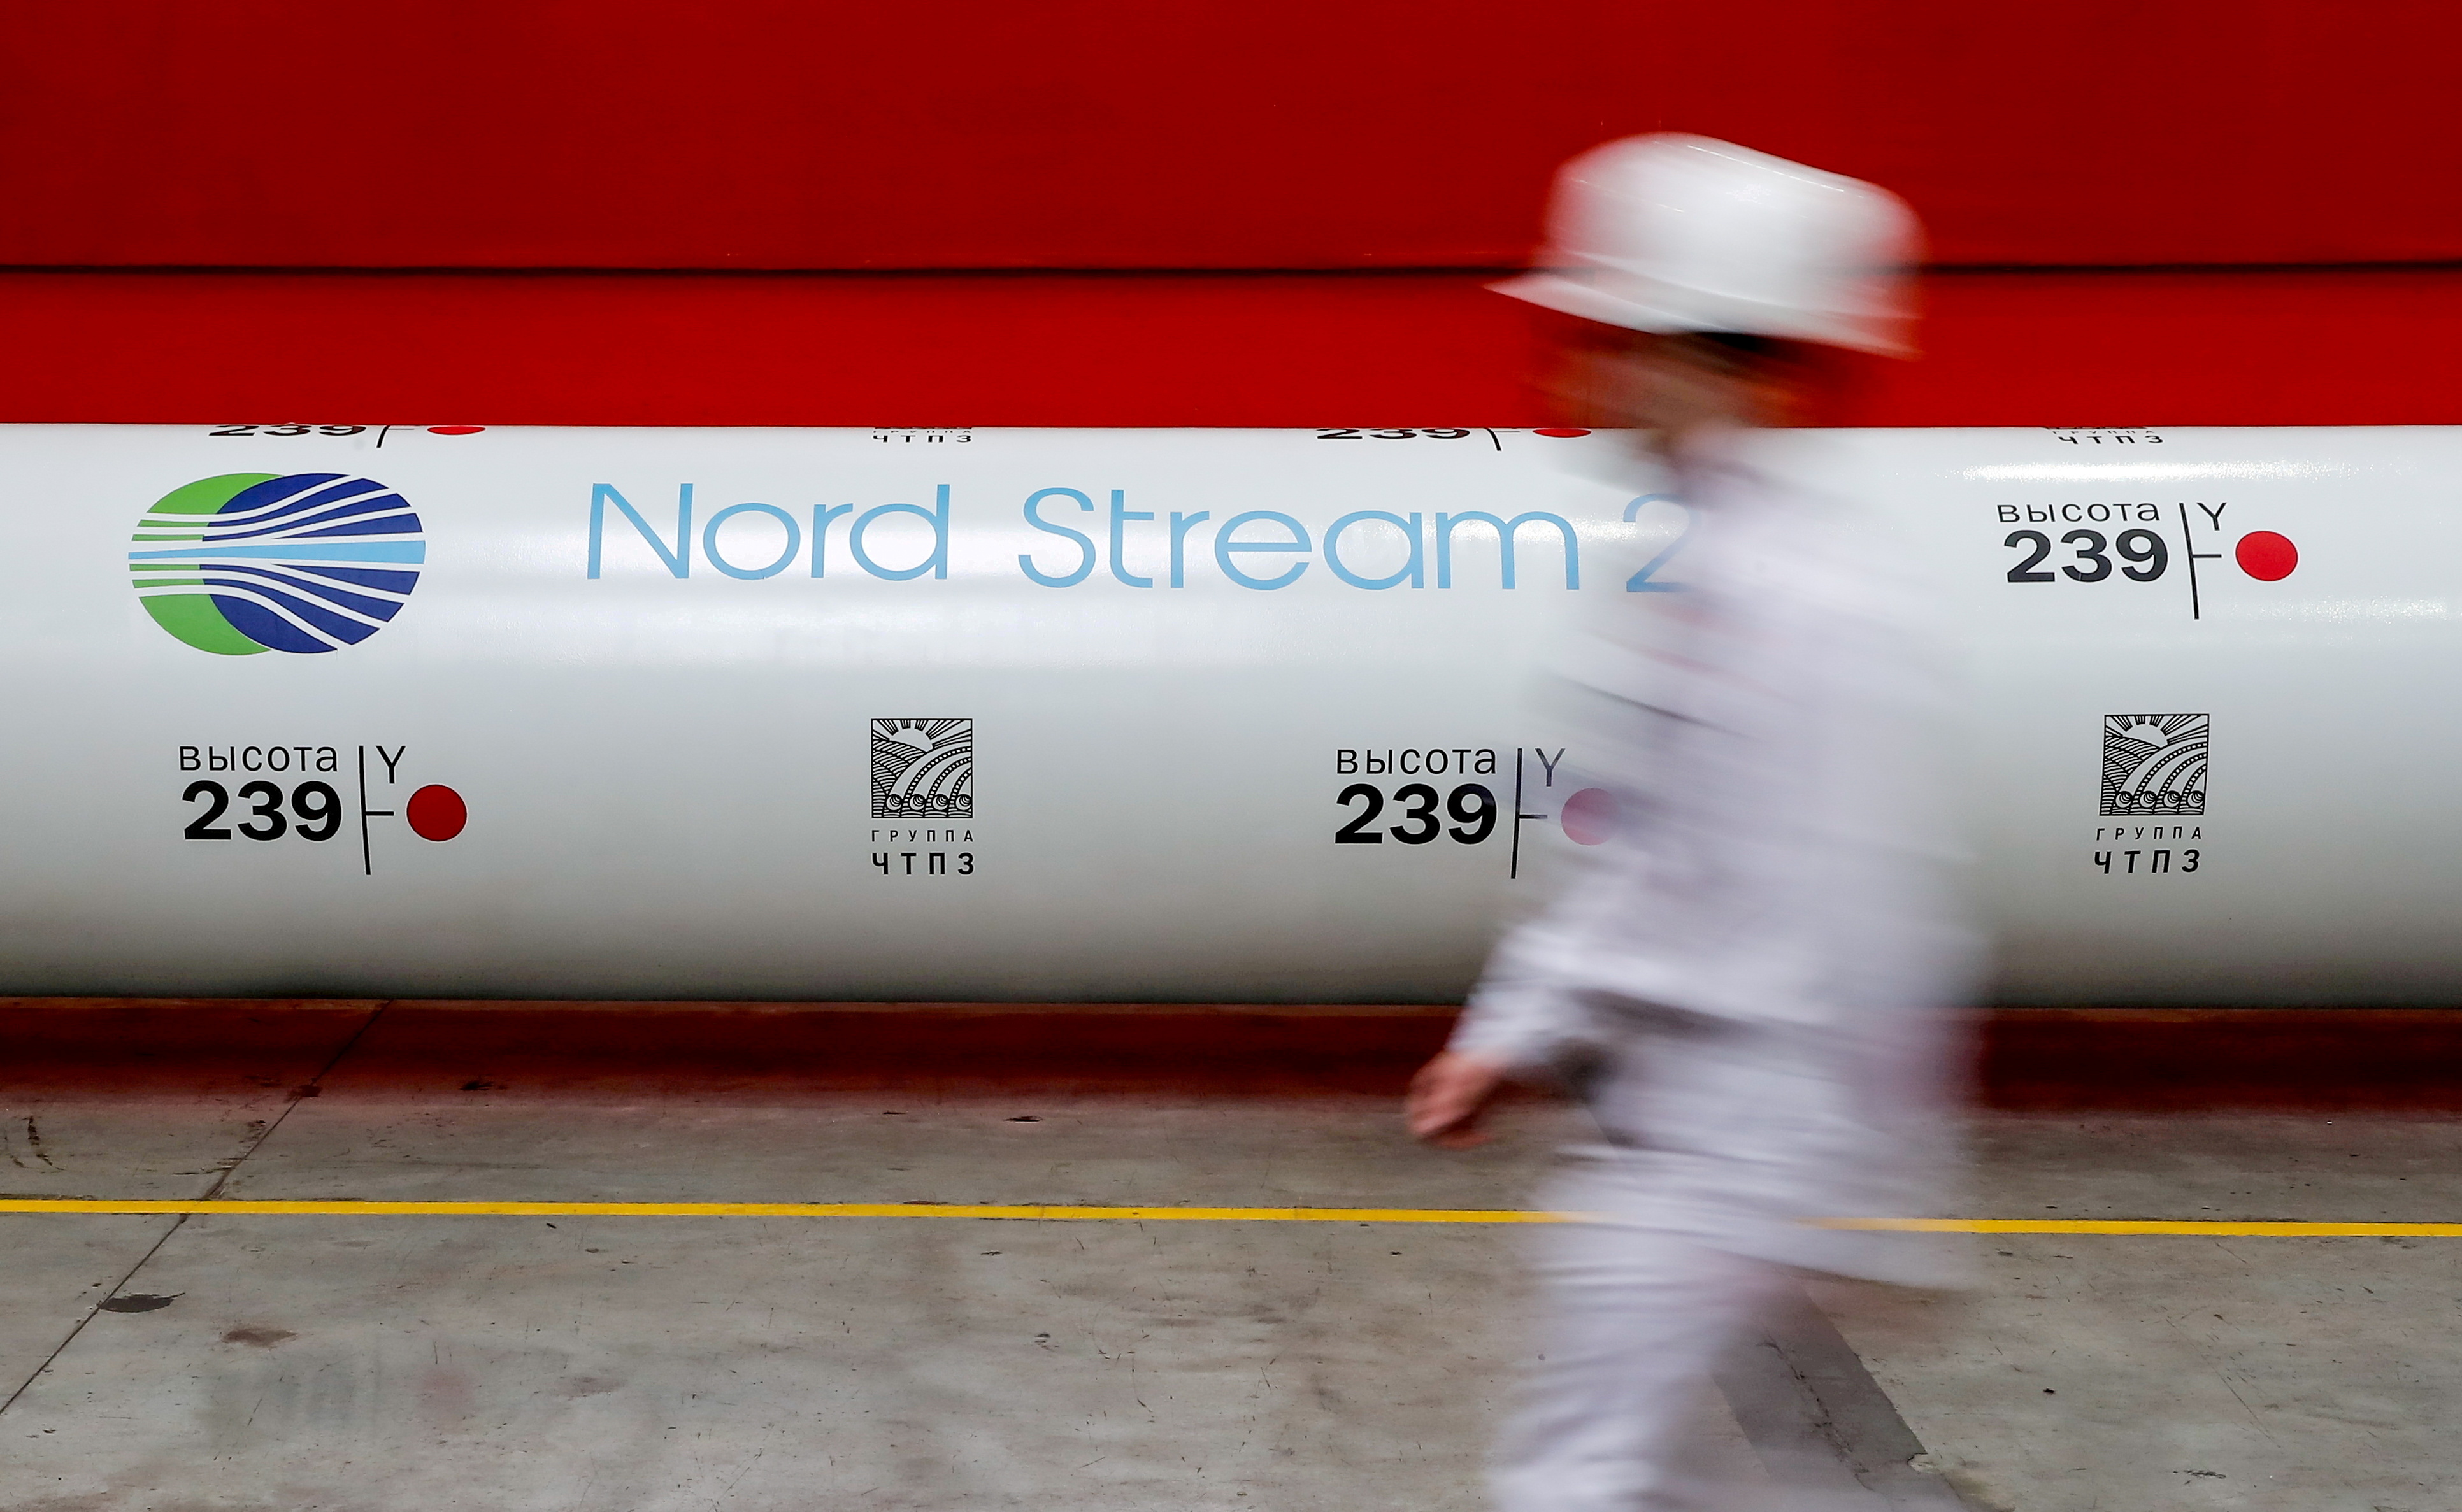 The logo of the Nord Stream 2 gas pipeline project is seen on a pipe at the Chelyabinsk pipe plant in Chelyabinsk, Russia